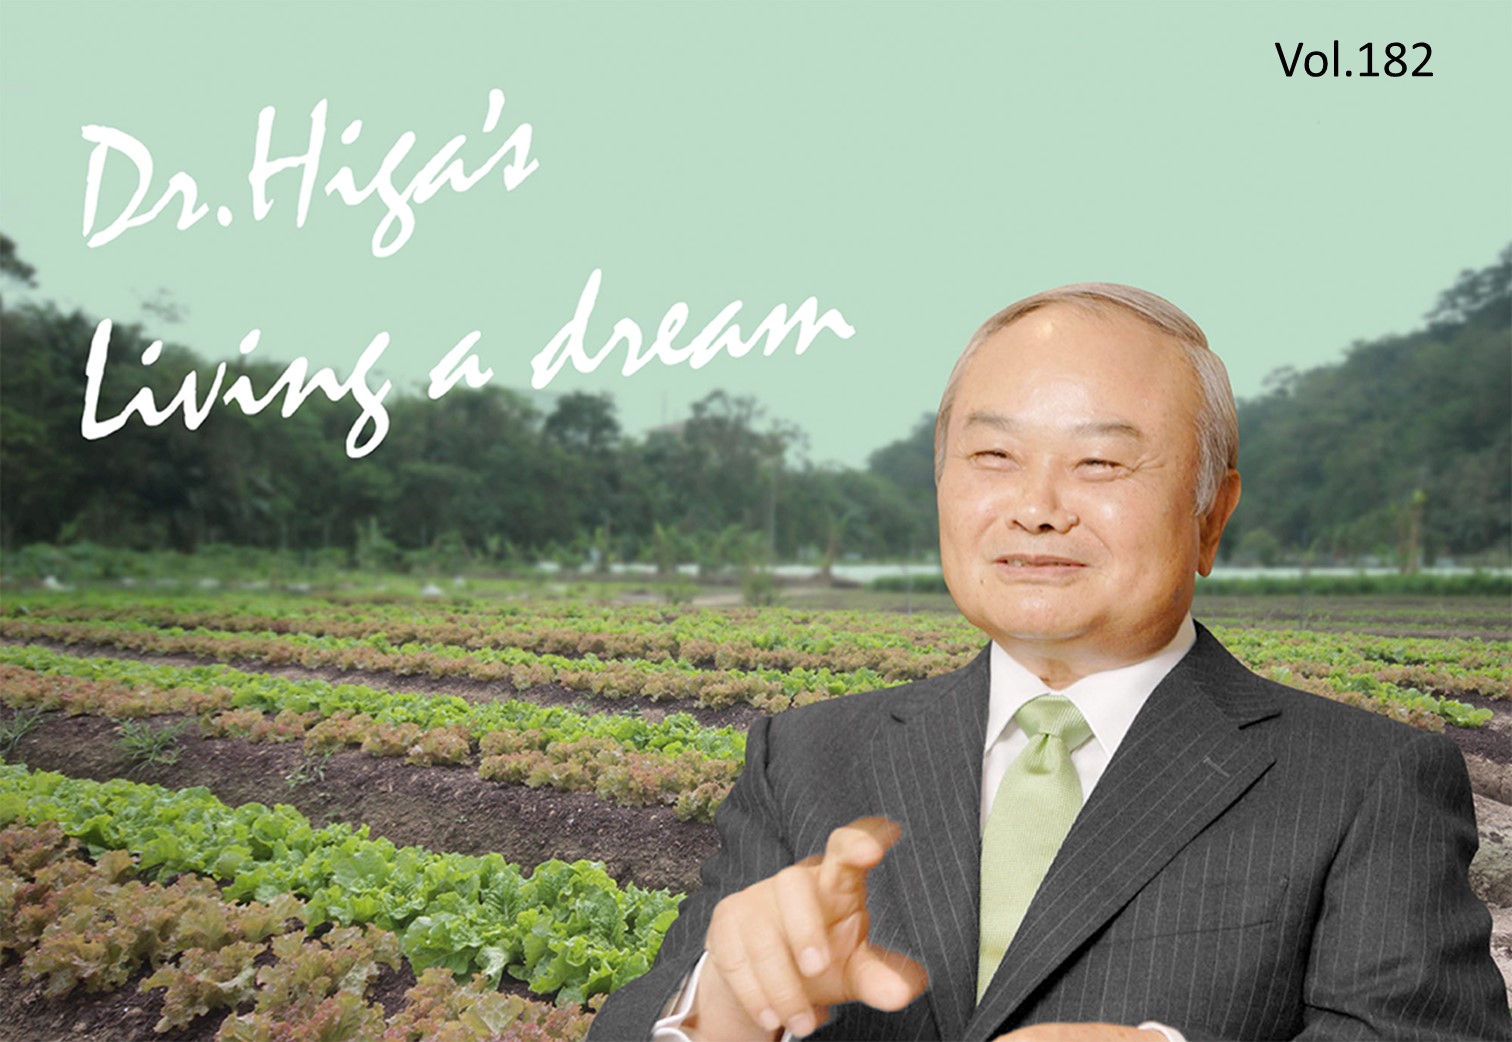 Dr. Higa's "Living a Dream": the latest article #182 is up!!!